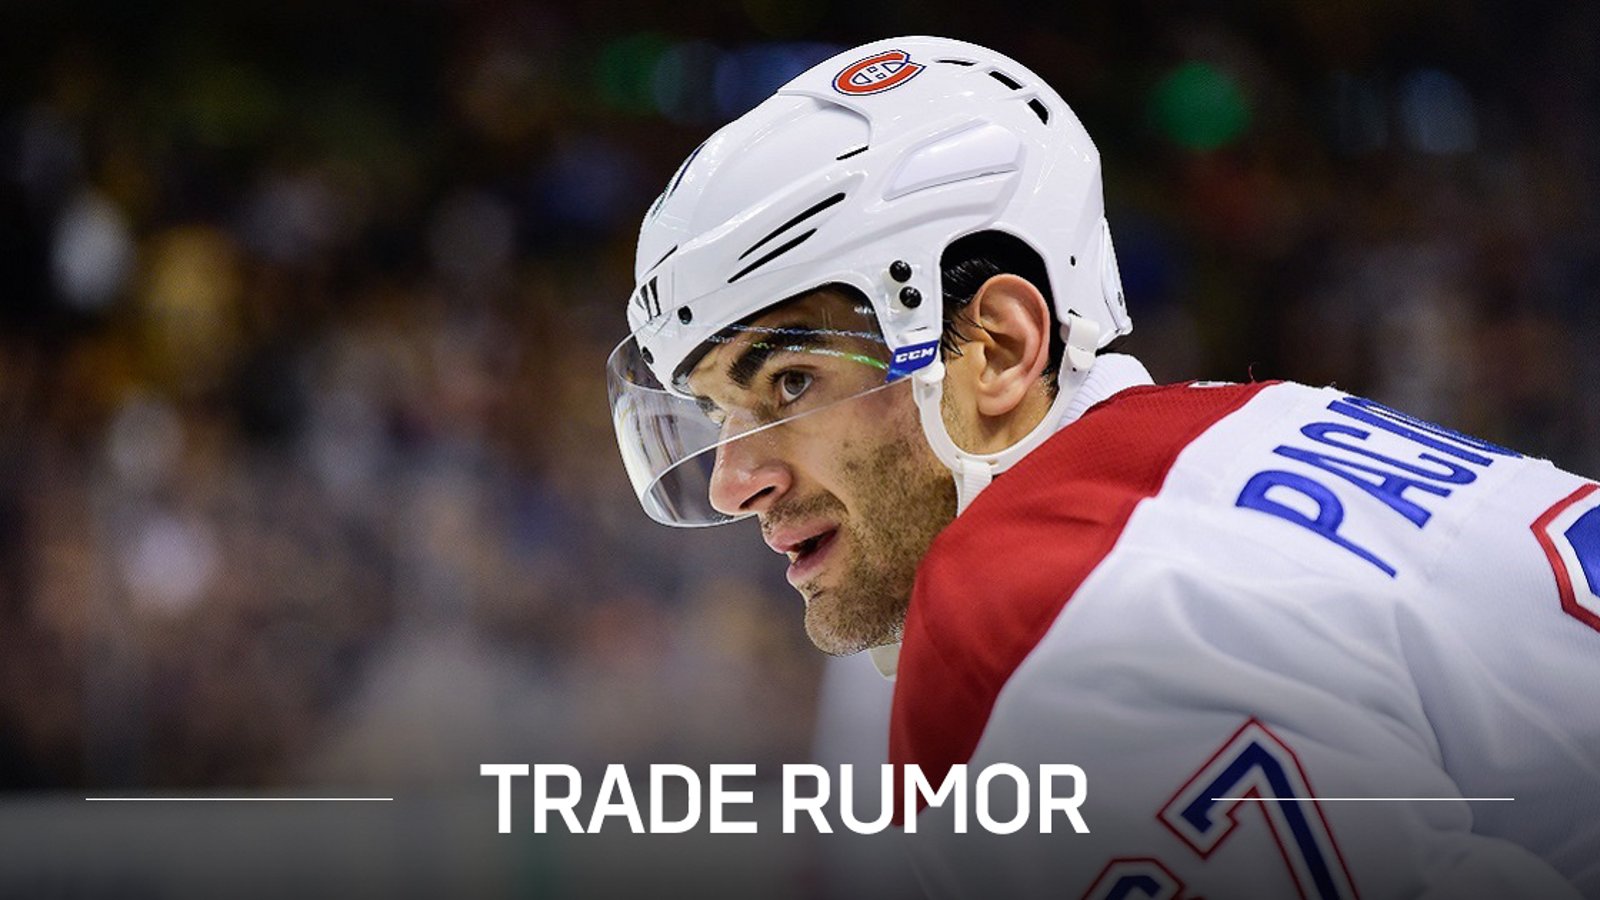 Comments from Habs captain indicate he knows he may be traded.